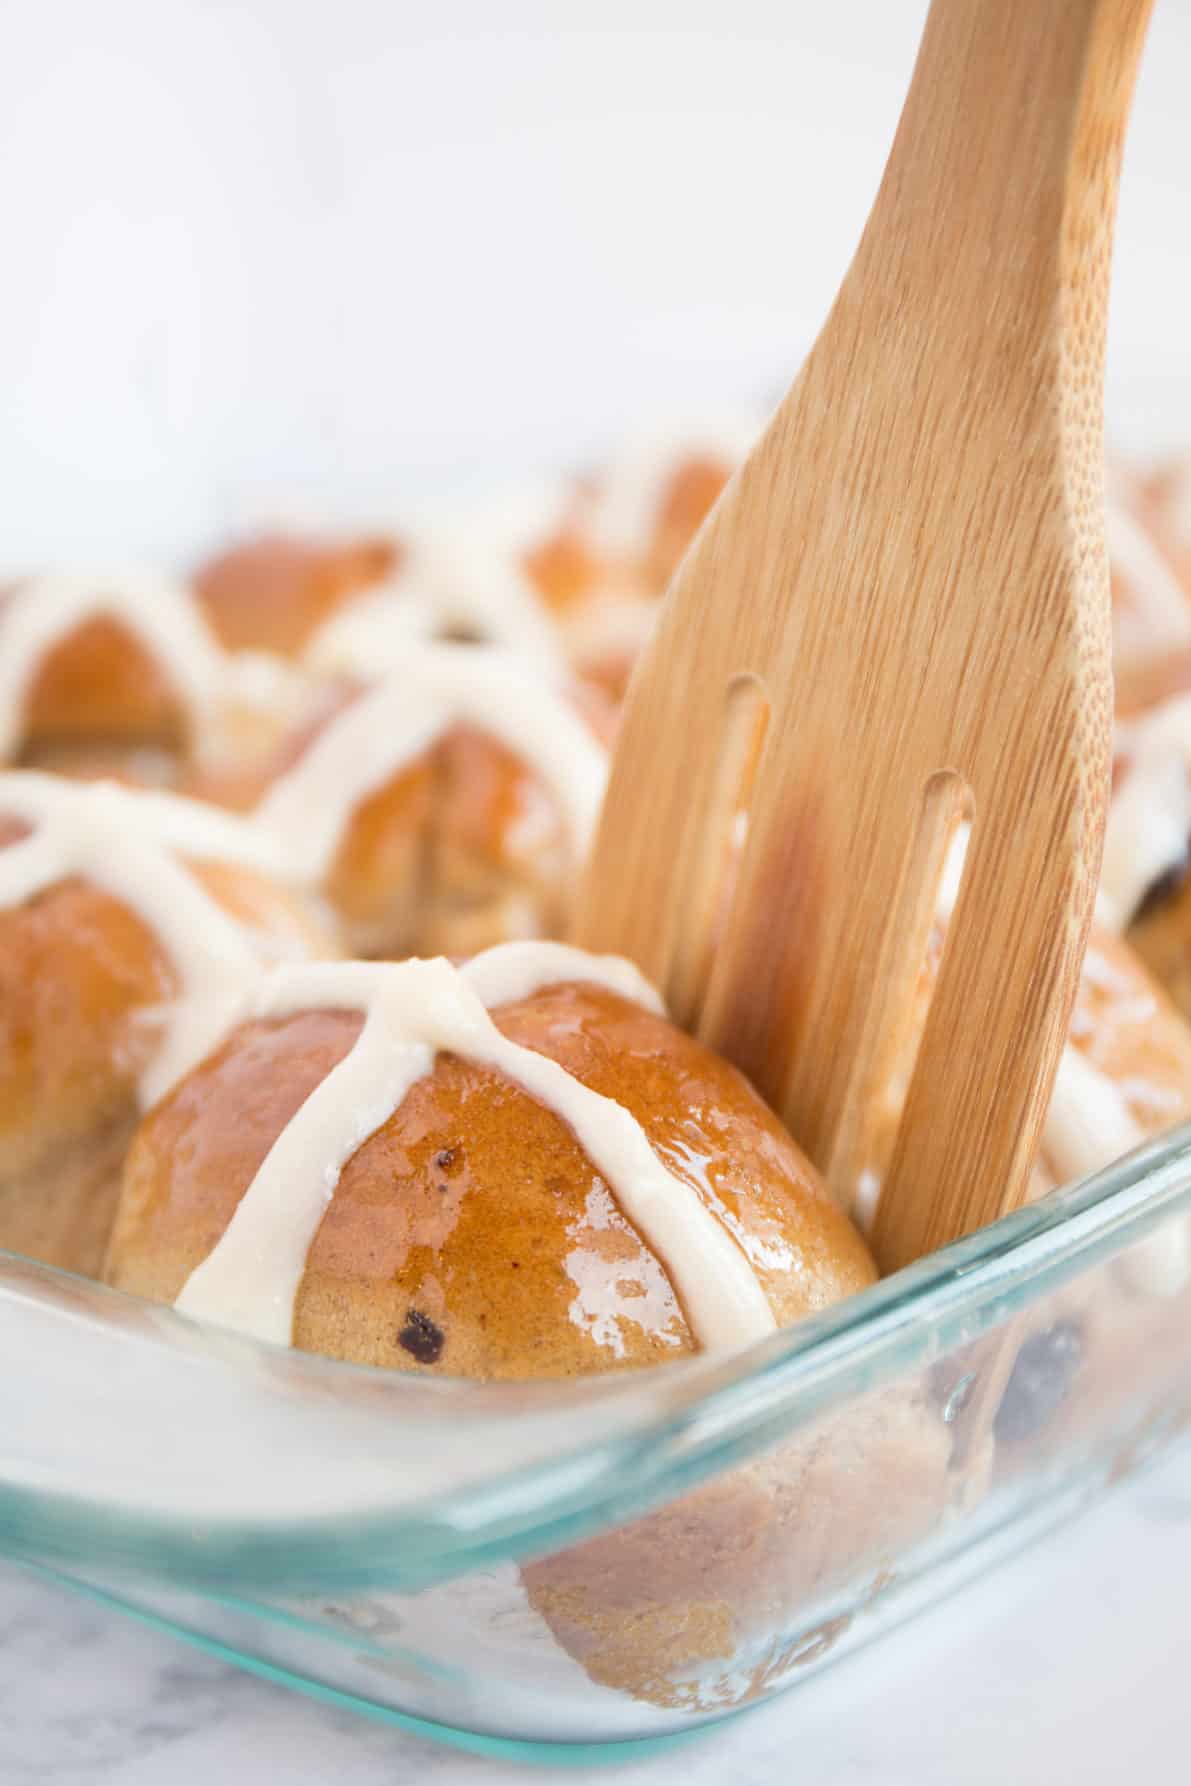 Hot Cross Buns being served out of the pan.